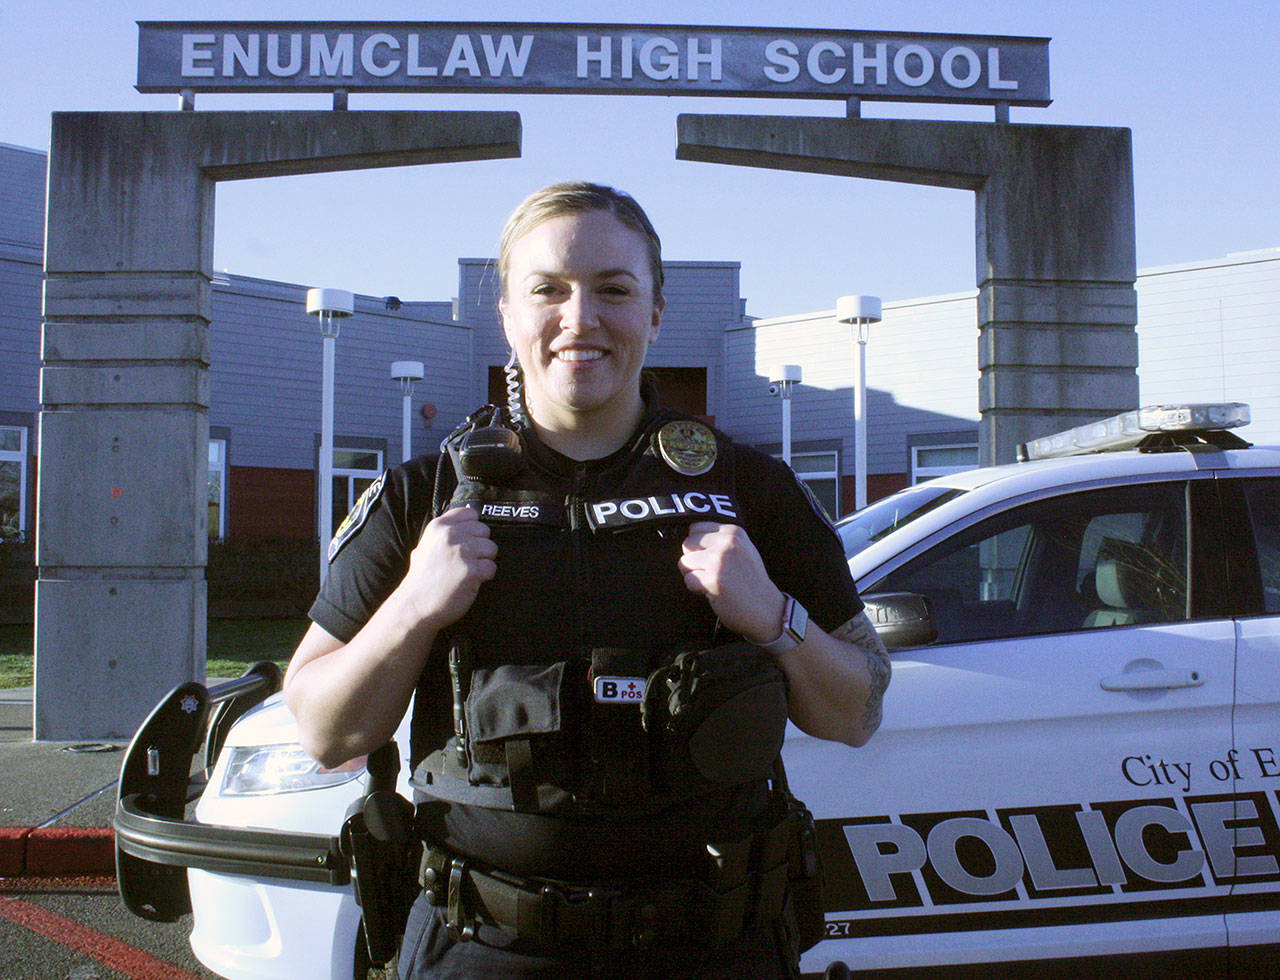 Enumclaw police officer Amanda Reeves will be assigned to Enumclaw High School as the first school resource officer. The position is a joint effort of the school district and police department. Kevin Hanson photo.